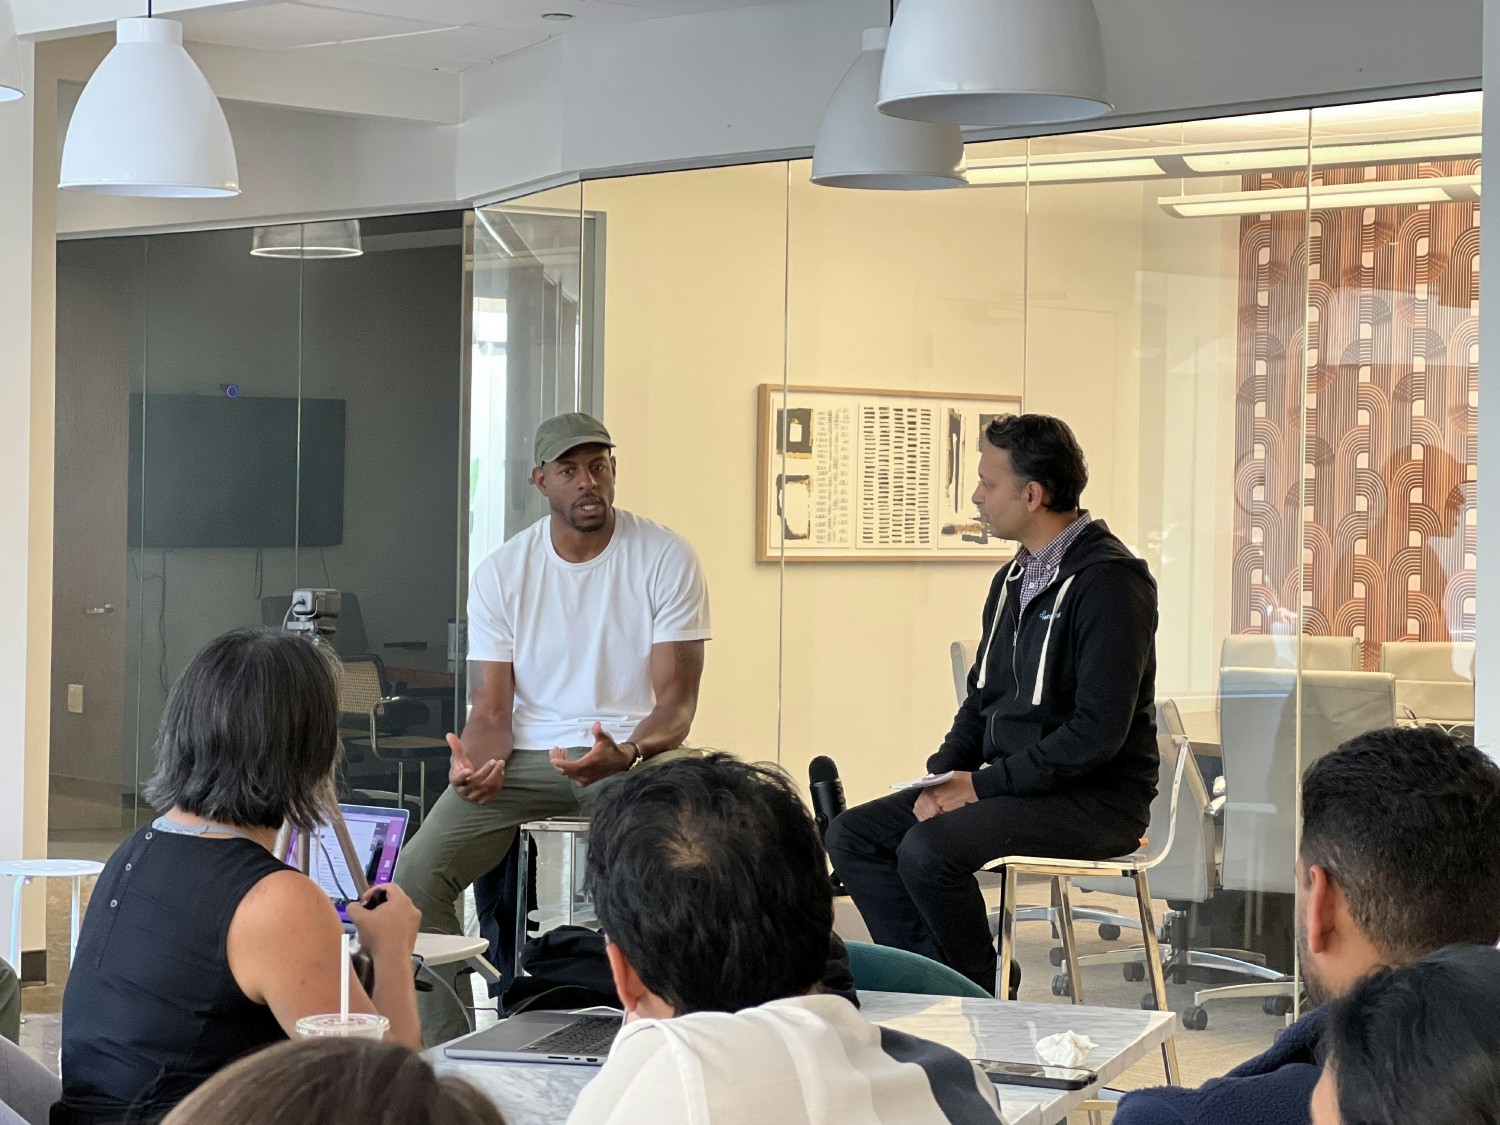 In this inspiring moment, our guest speaker, Andre Iguodala, shares his wisdom, alongside our CEO, Ankit Jain.